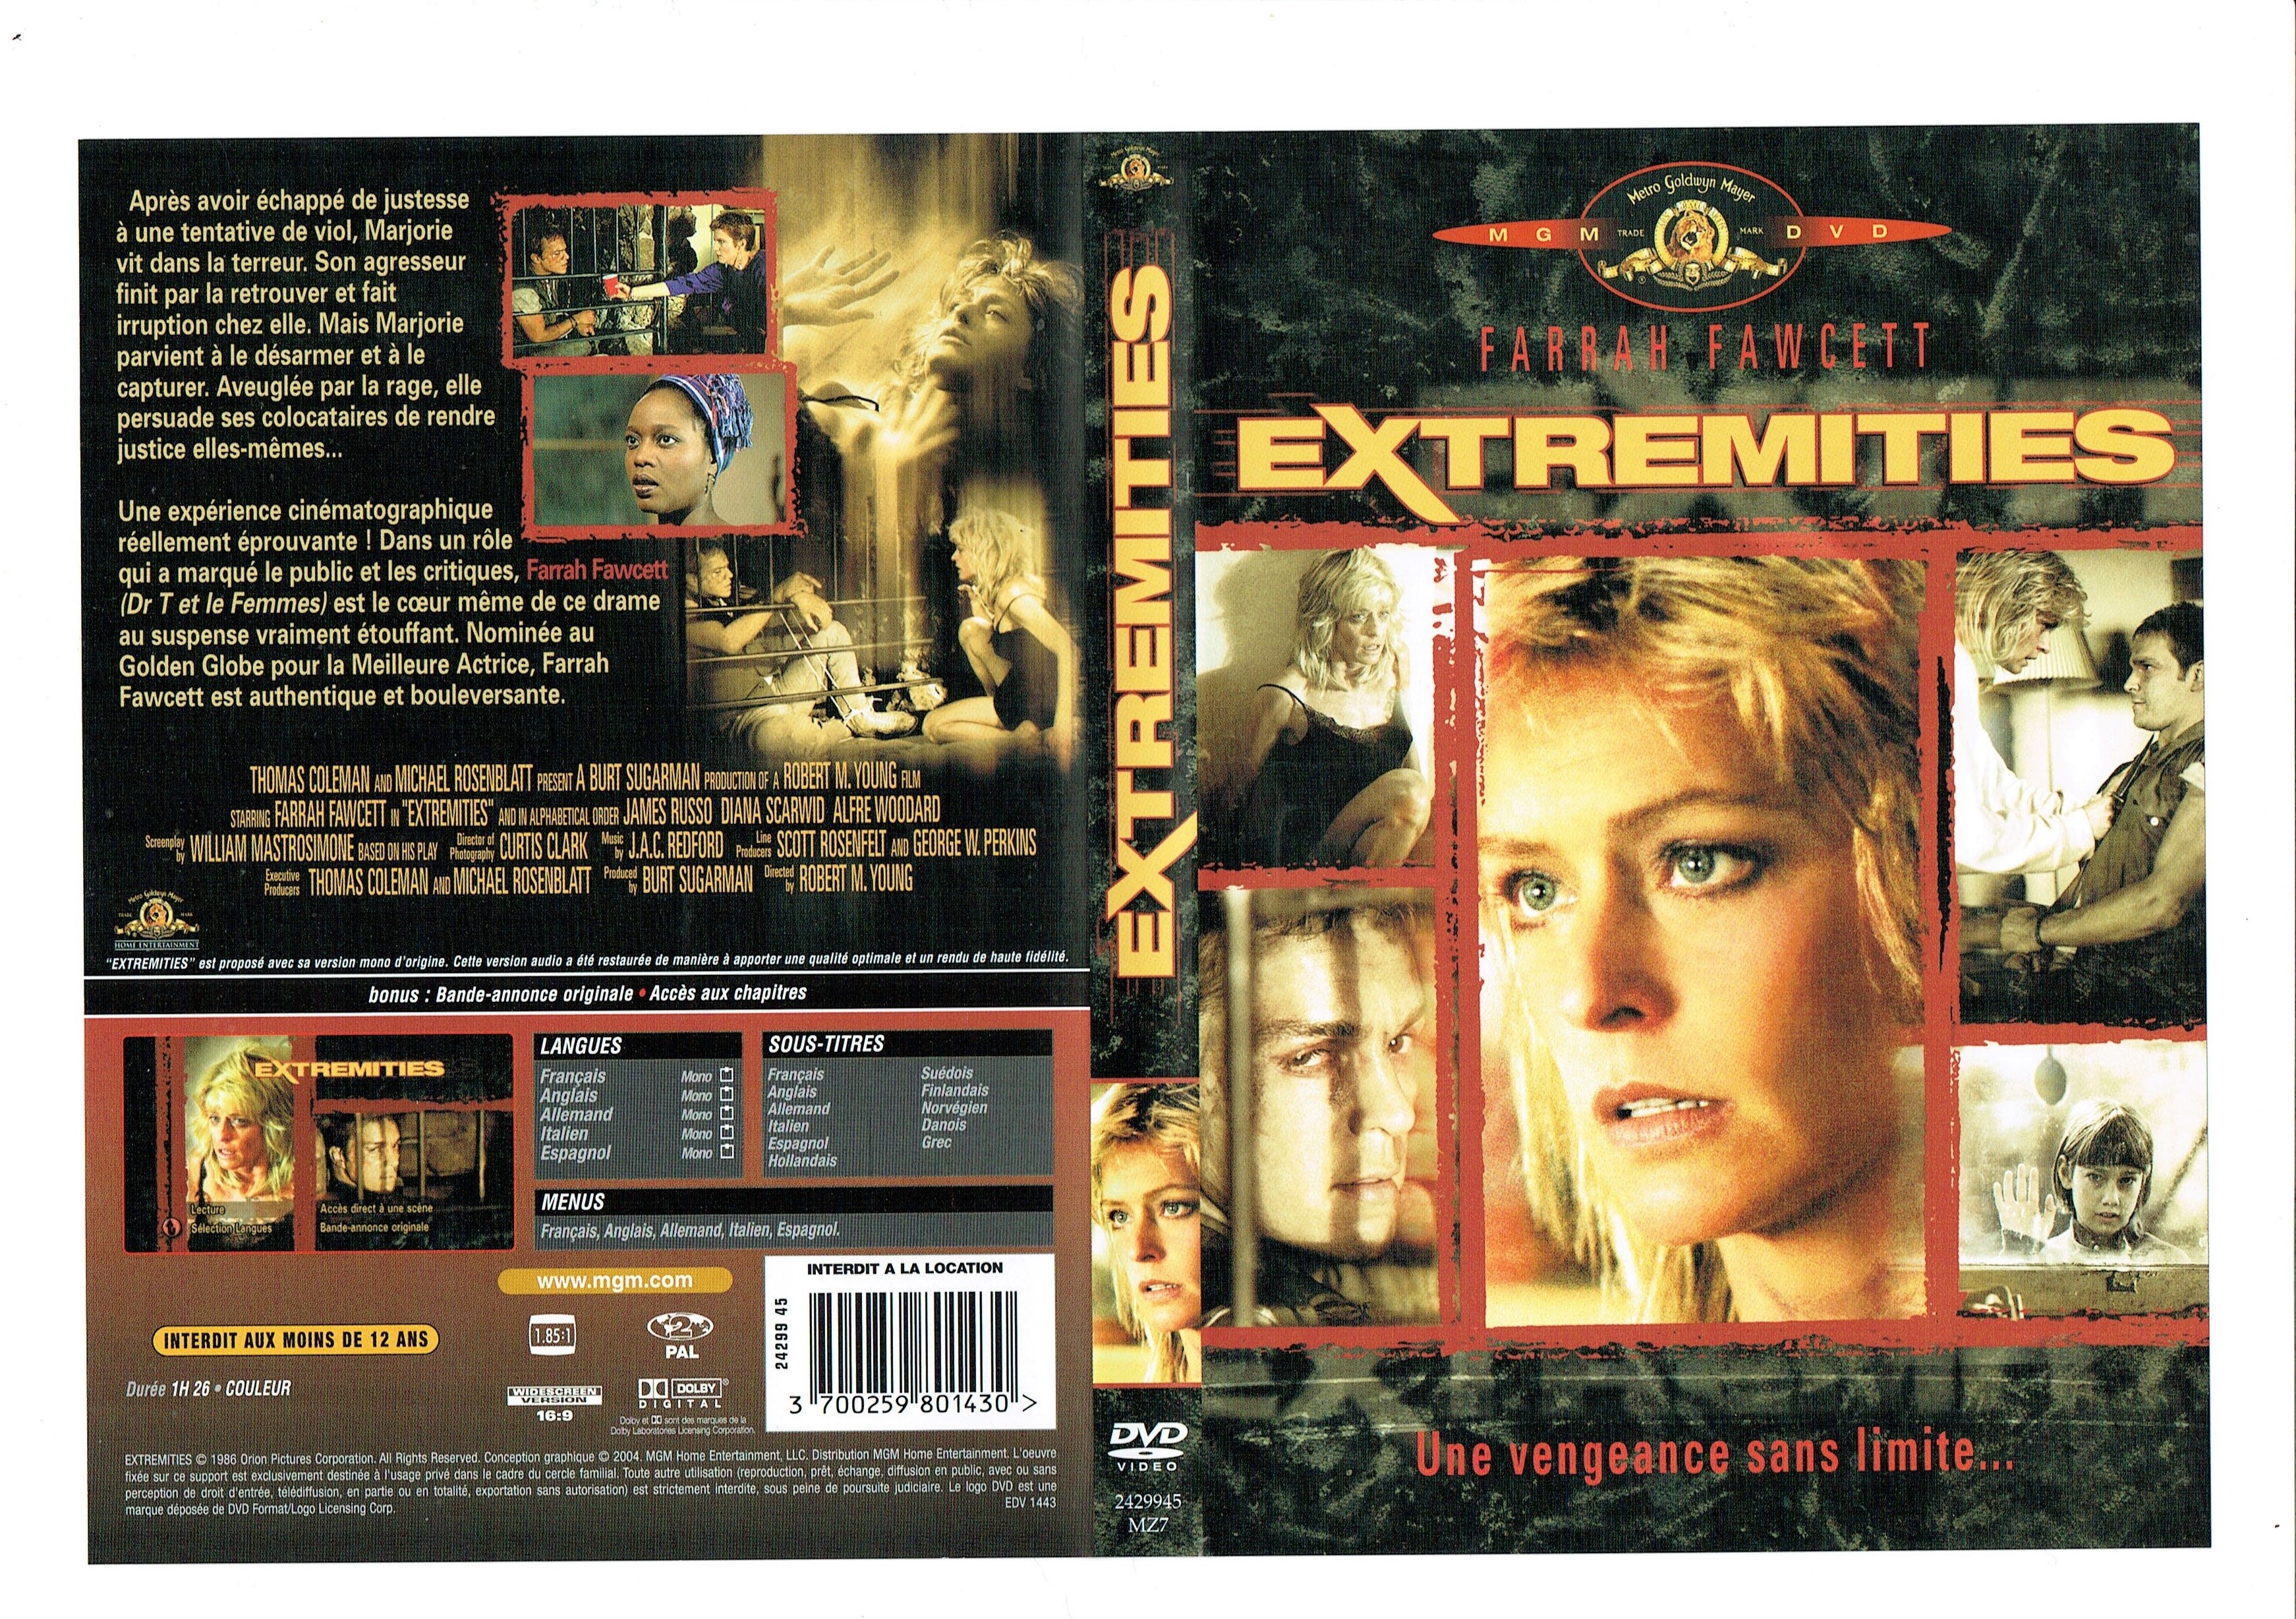 Jaquette DVD Extremities